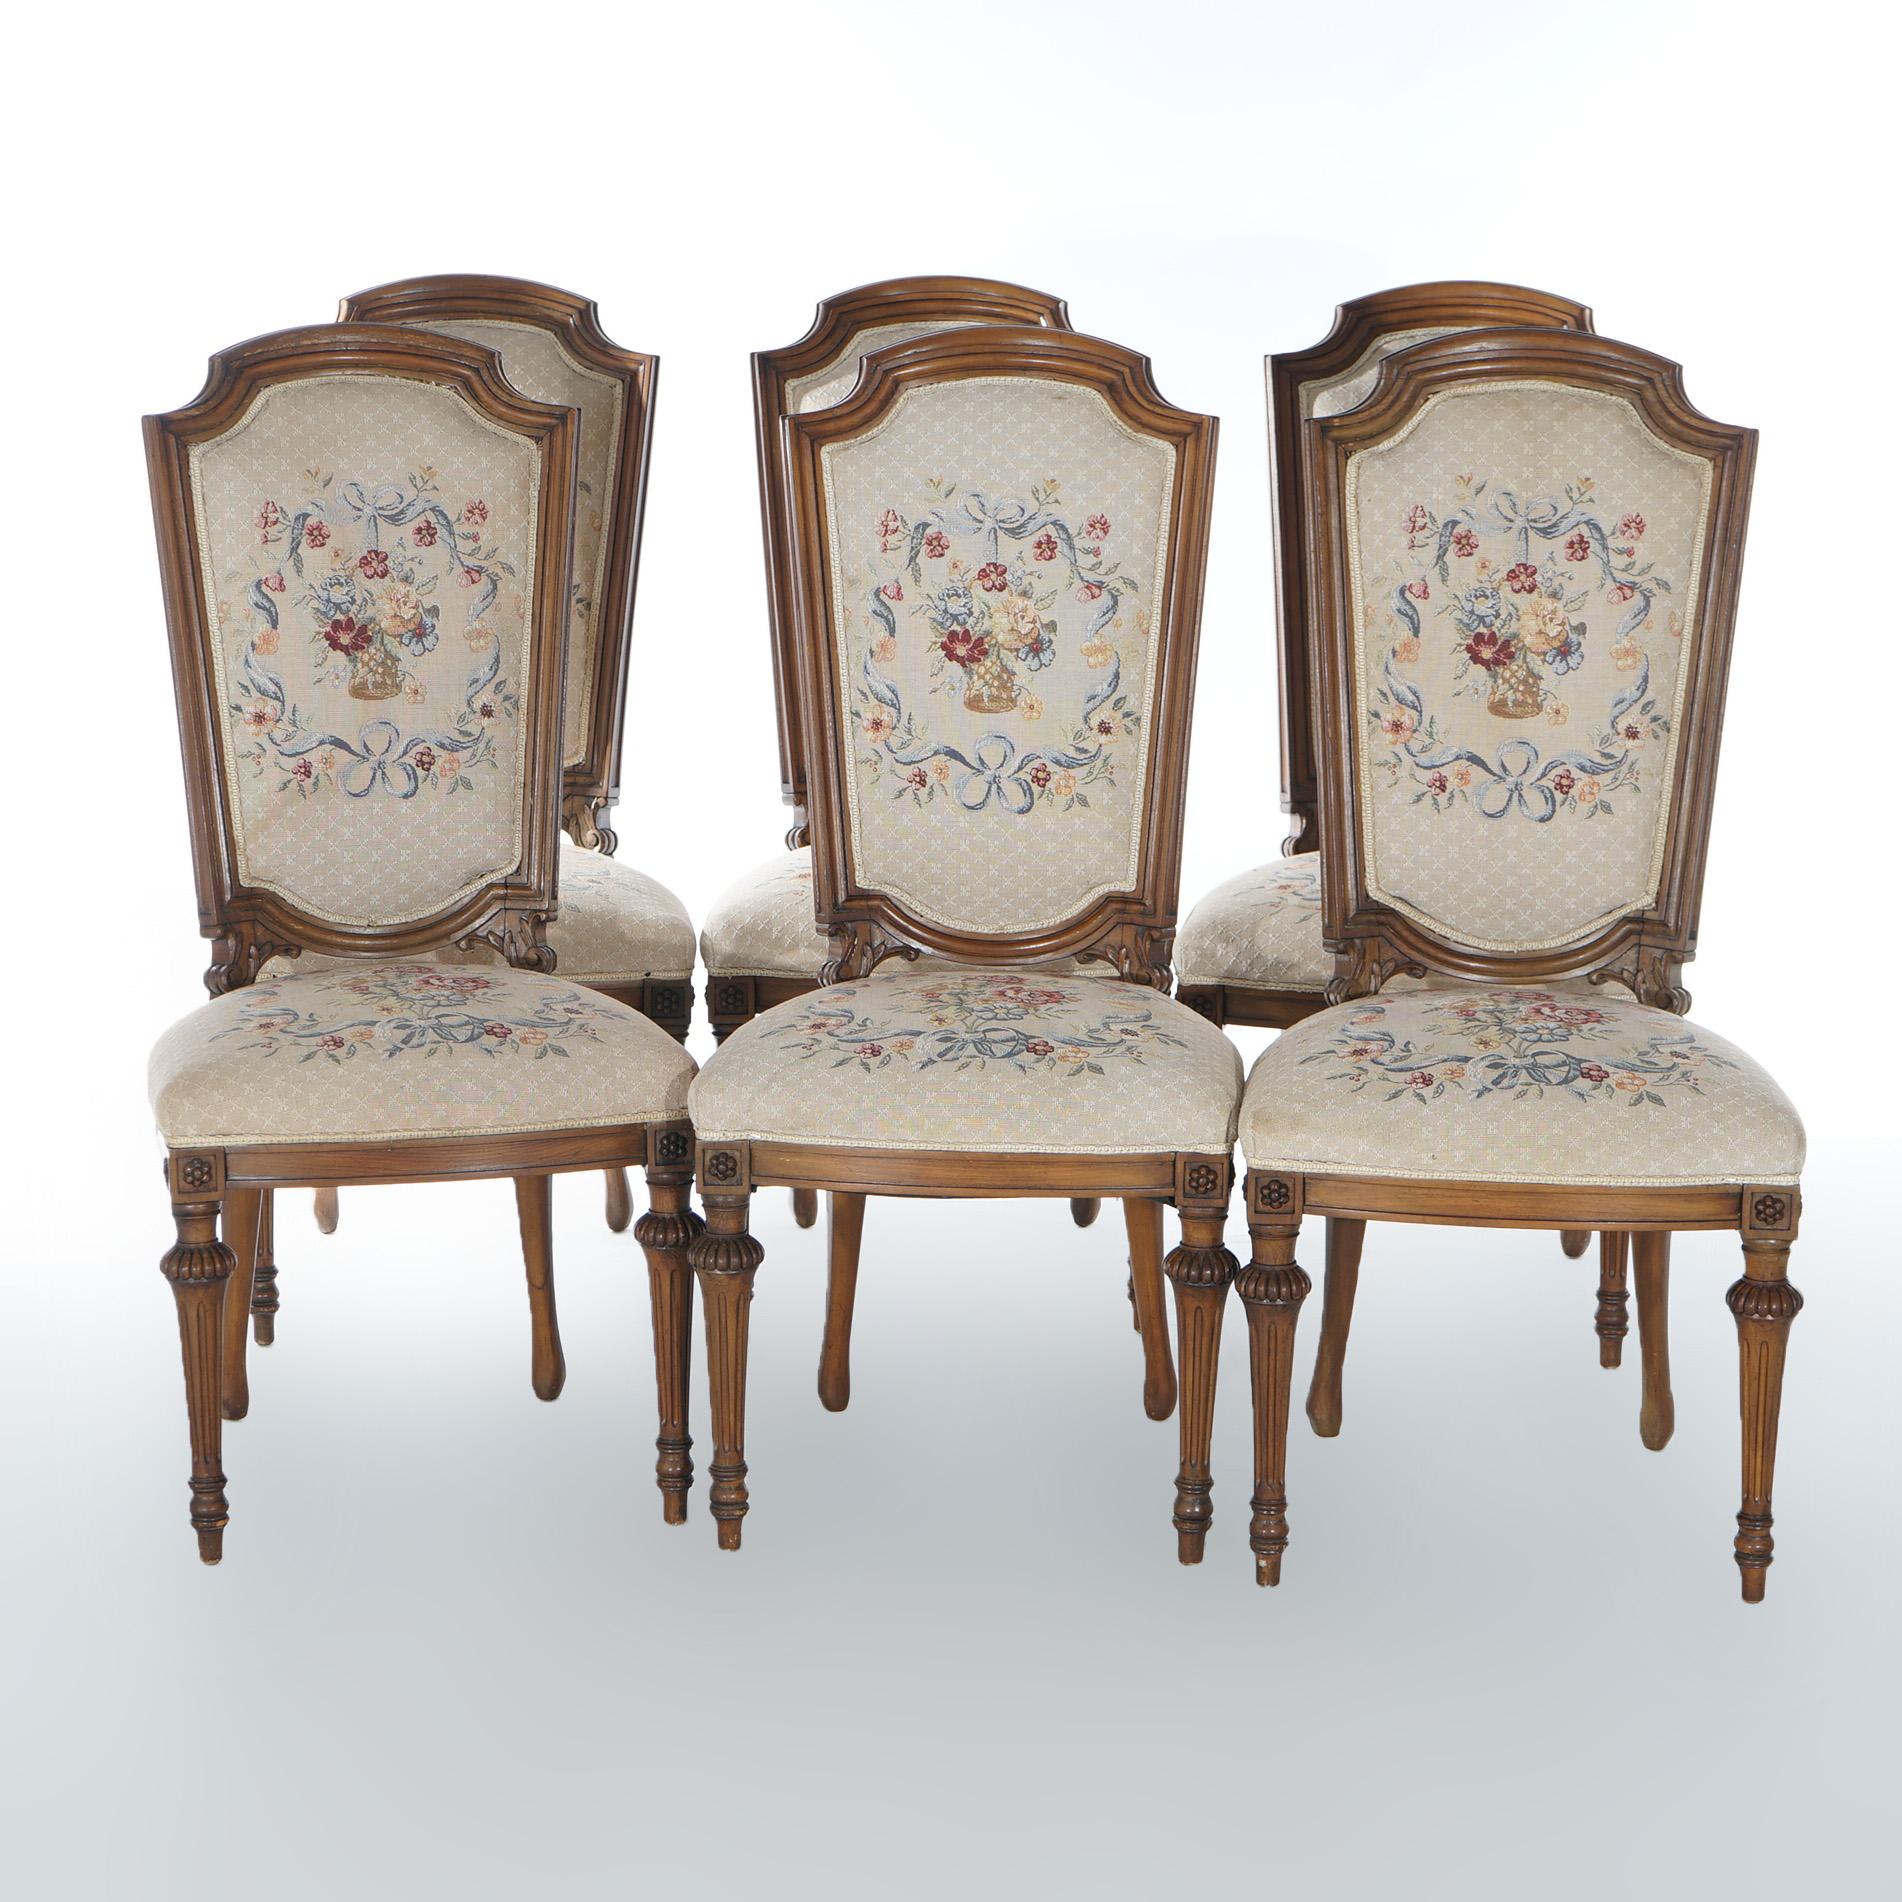 A set of eight antique French Louis XVI dining chairs offer walnut
frames with floral tapestry upholstery and raised on turned, tapered and reeded legs; master with scroll form and covered arms; includes single master with seven side chairs;